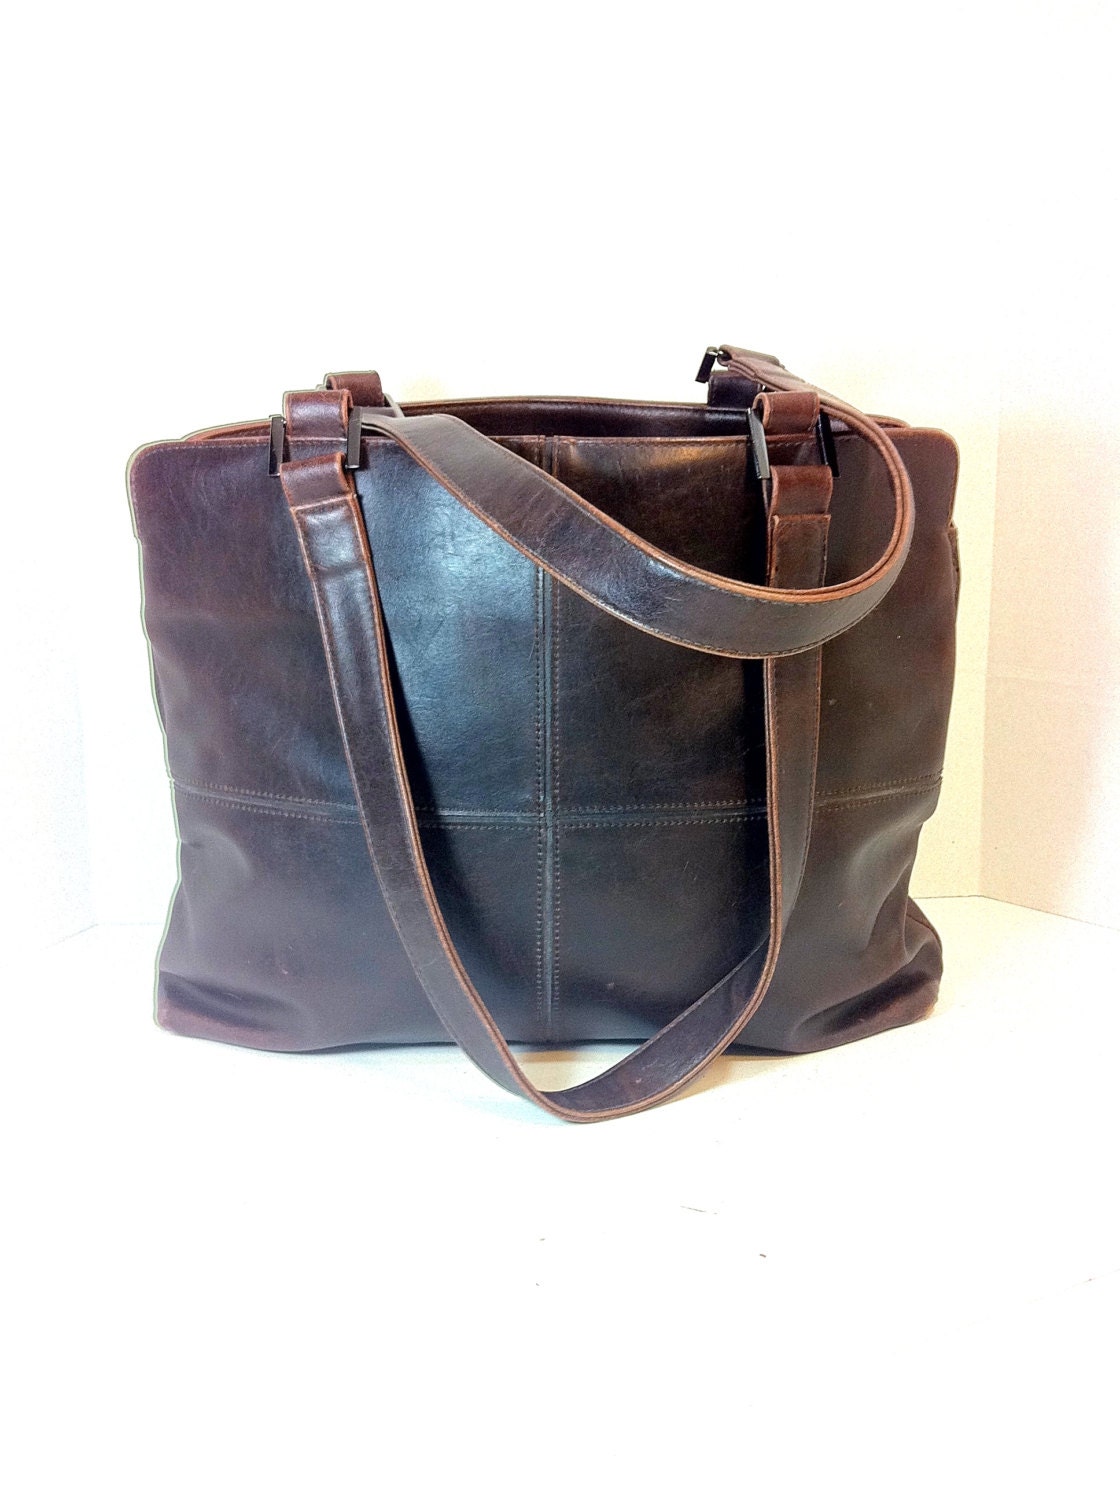 Large Leather Bag Brown Leather Tote by MelissaJoyVintage